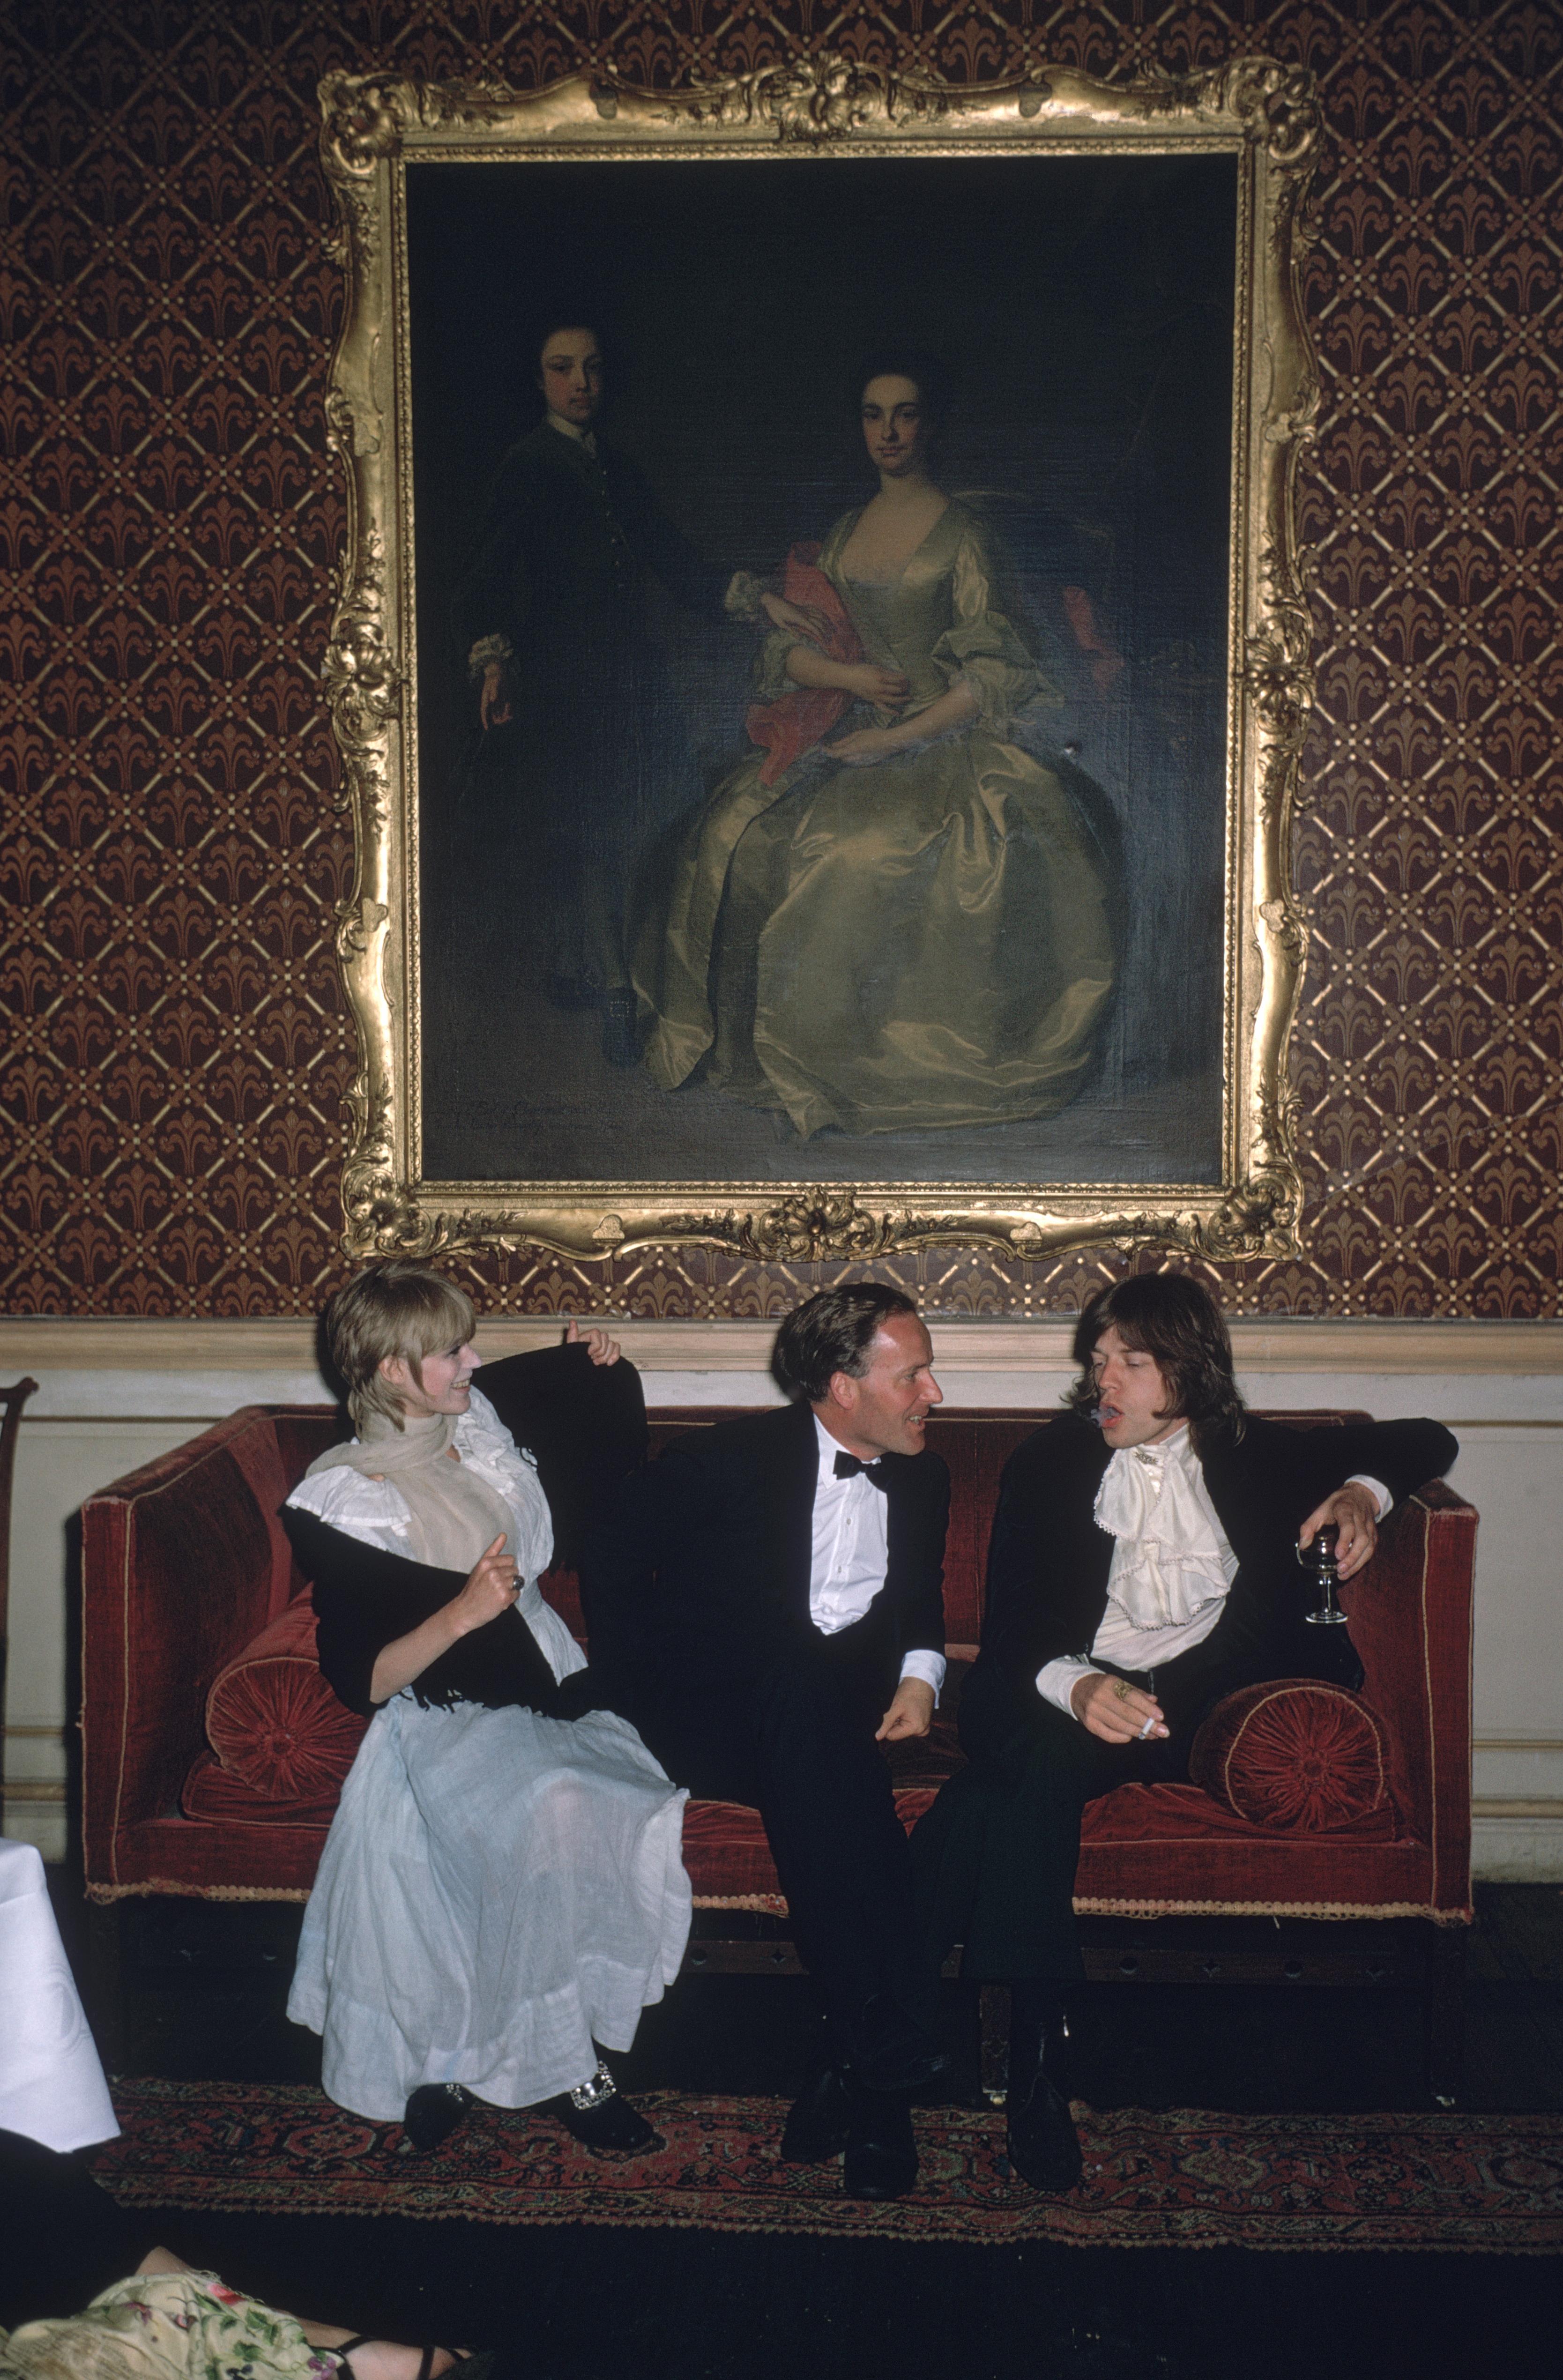 Slim Aarons Portrait Photograph - Pop and Society: Mick Jagger and Marianne Faithfull at vintage Leixlip Castle